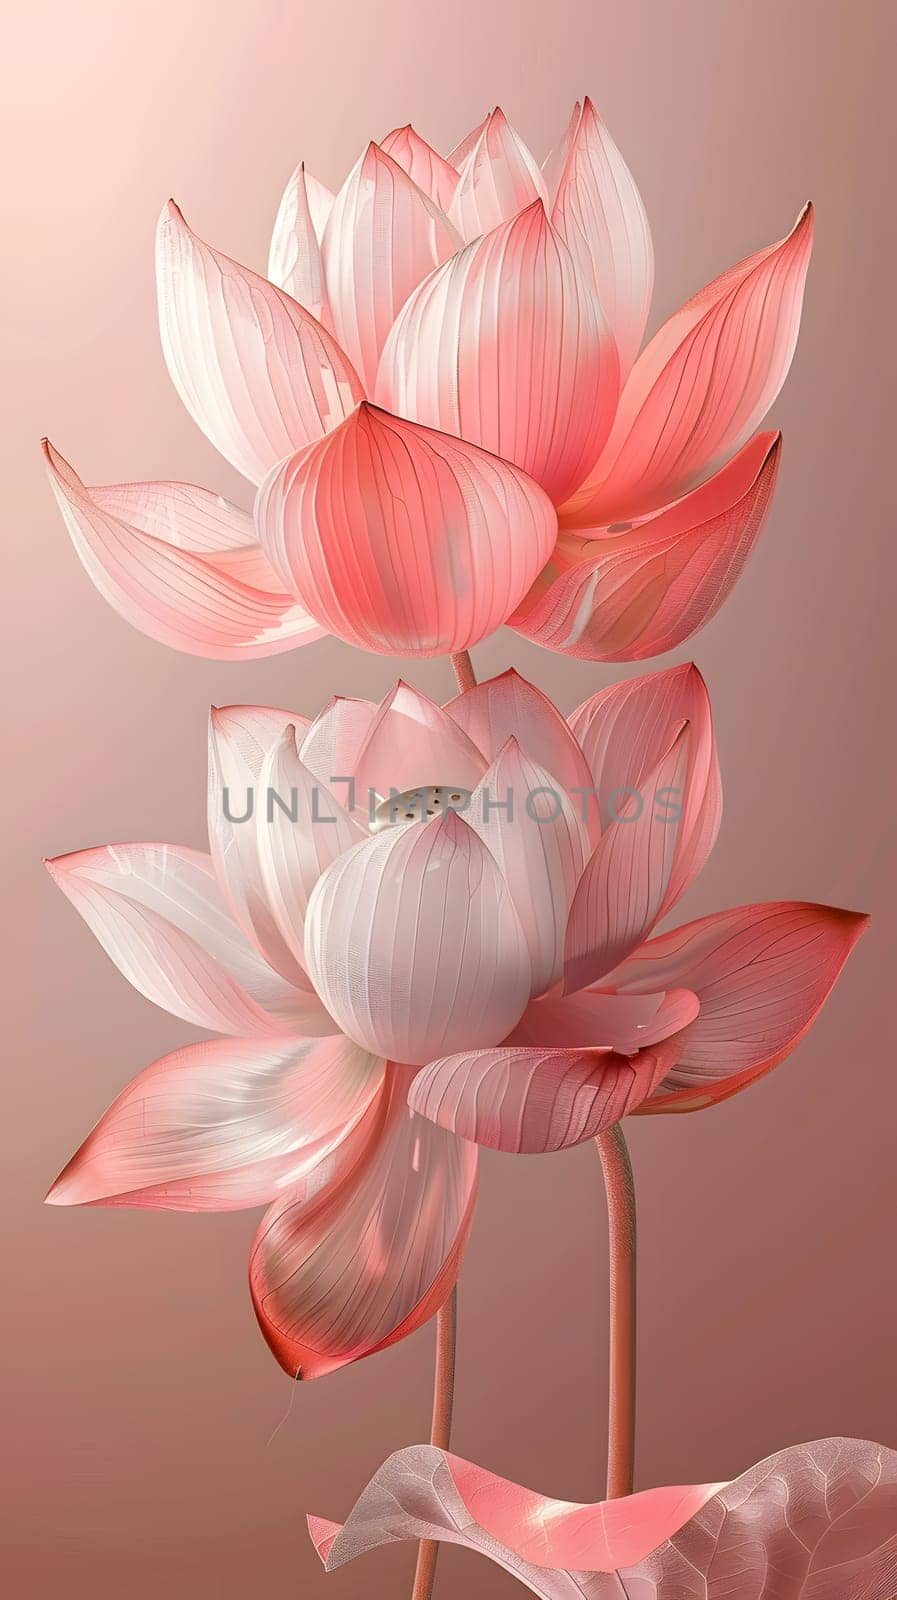 Close up of two pink lotus flowers on pink background by Nadtochiy